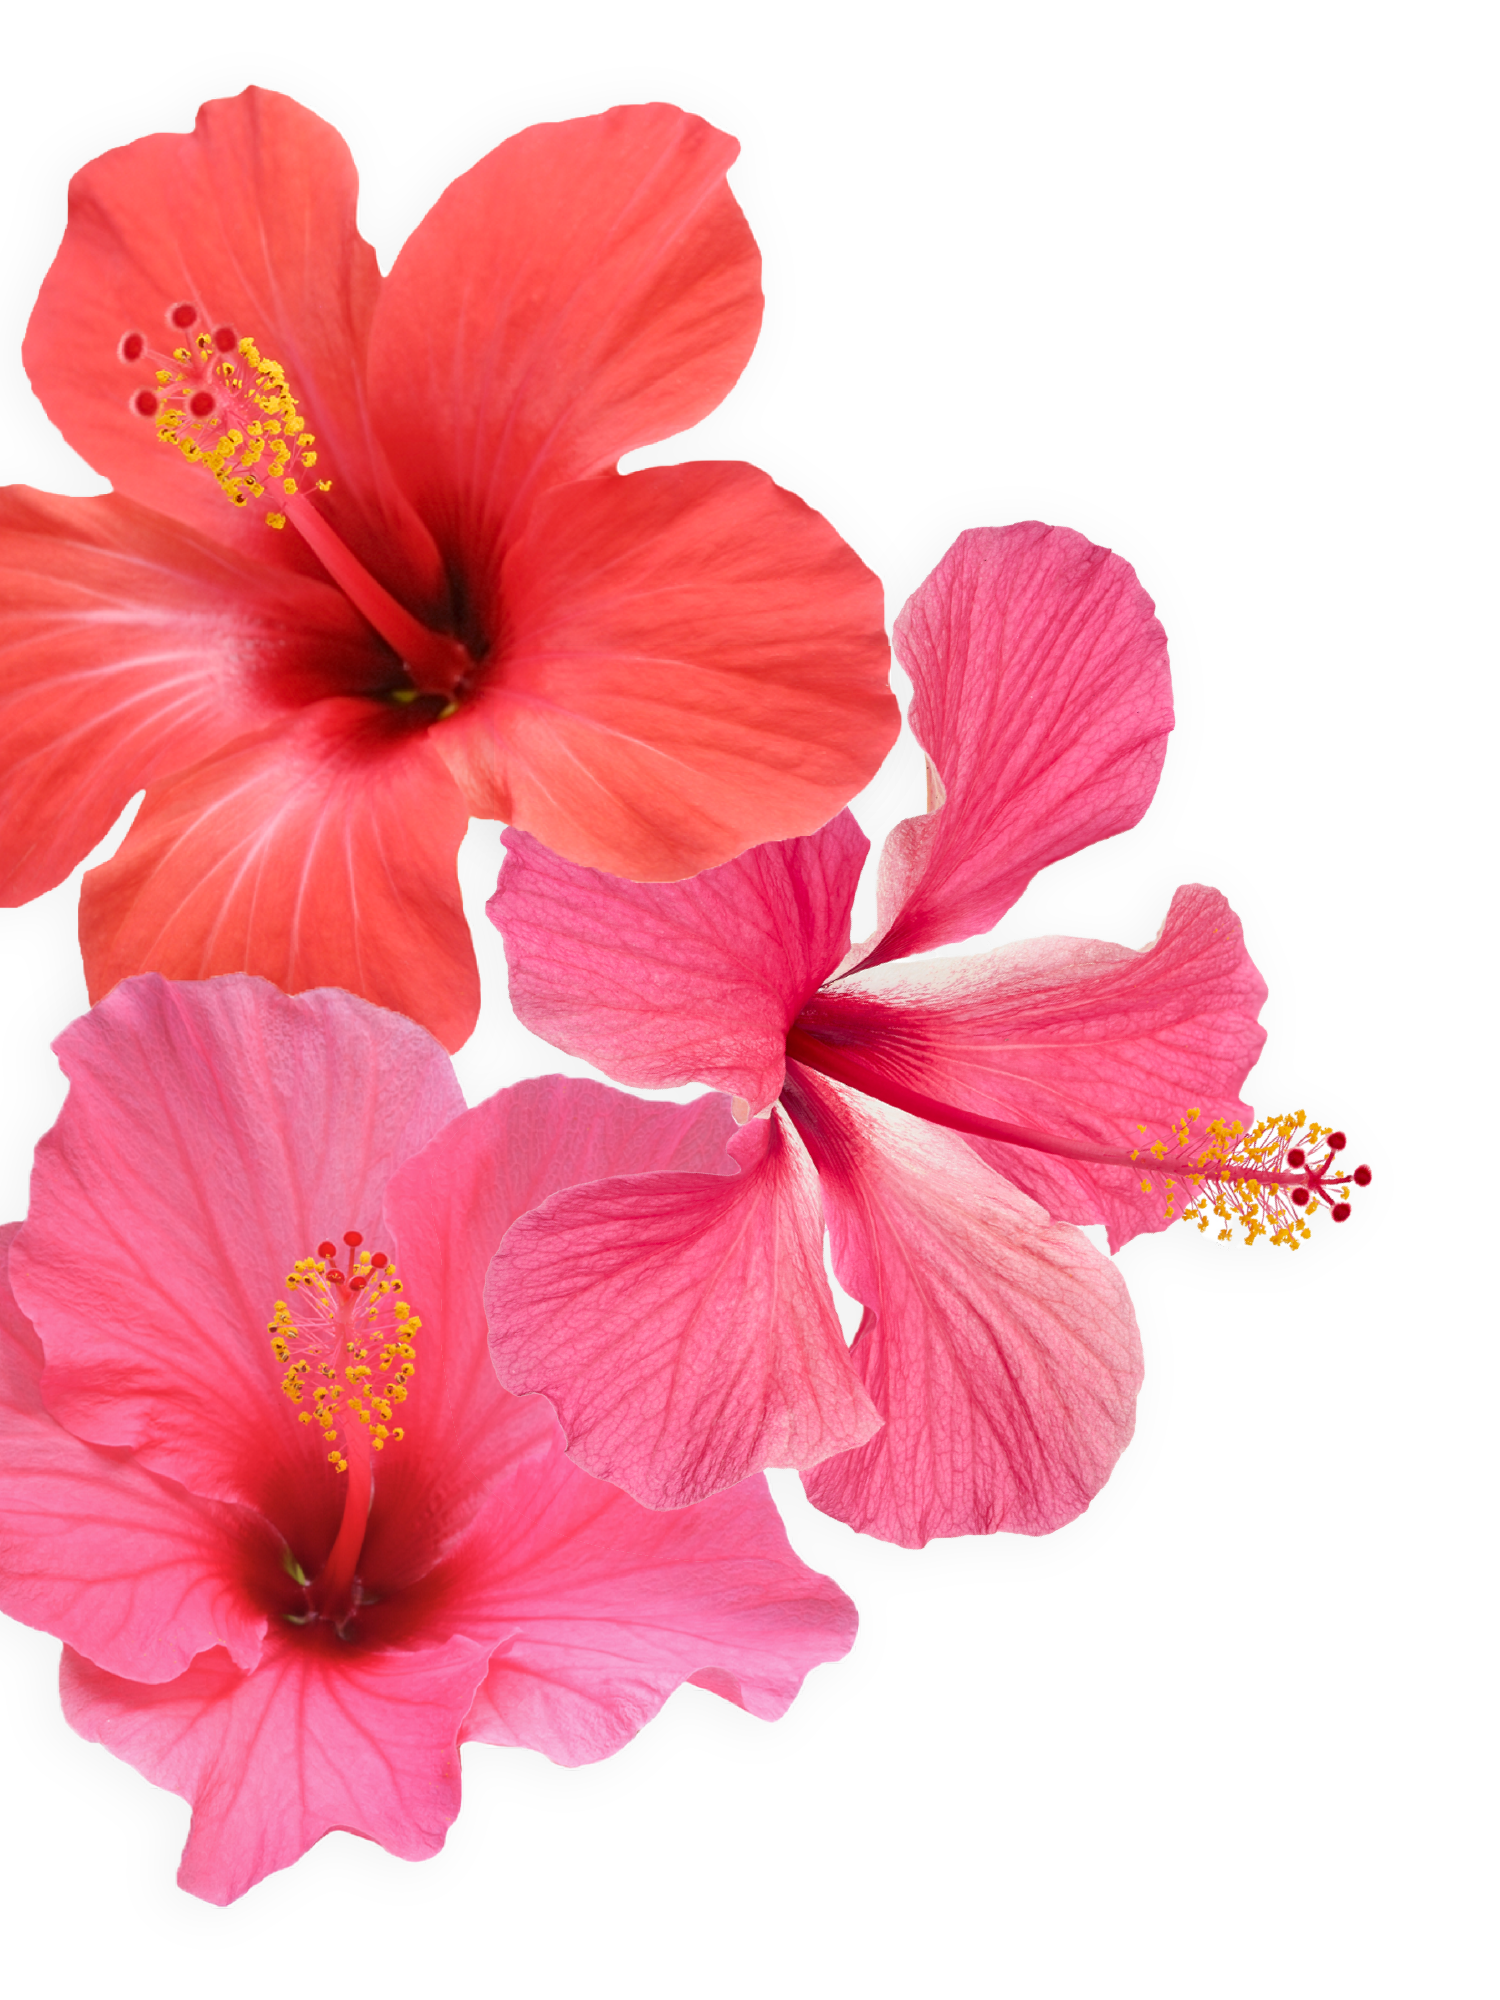 Group of three different pink tropical flowers